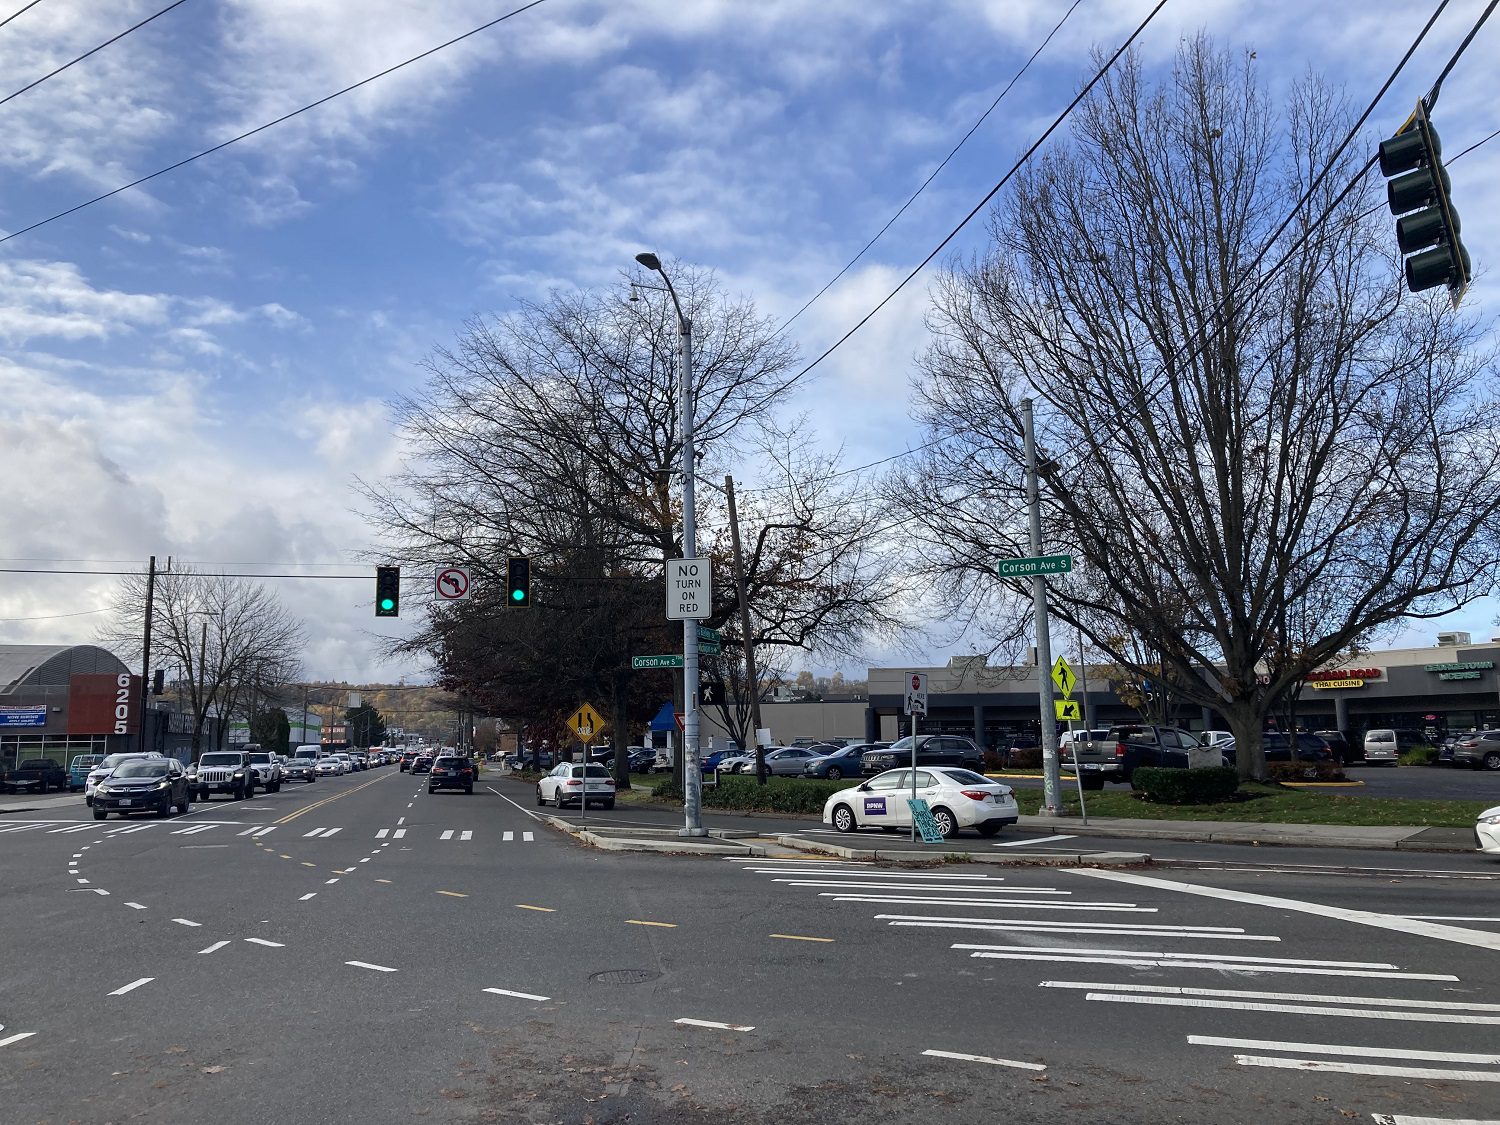 Photo of an intersection with cars visible and large trees on a clear day. A marked crosswalk is on the right side of the photo.